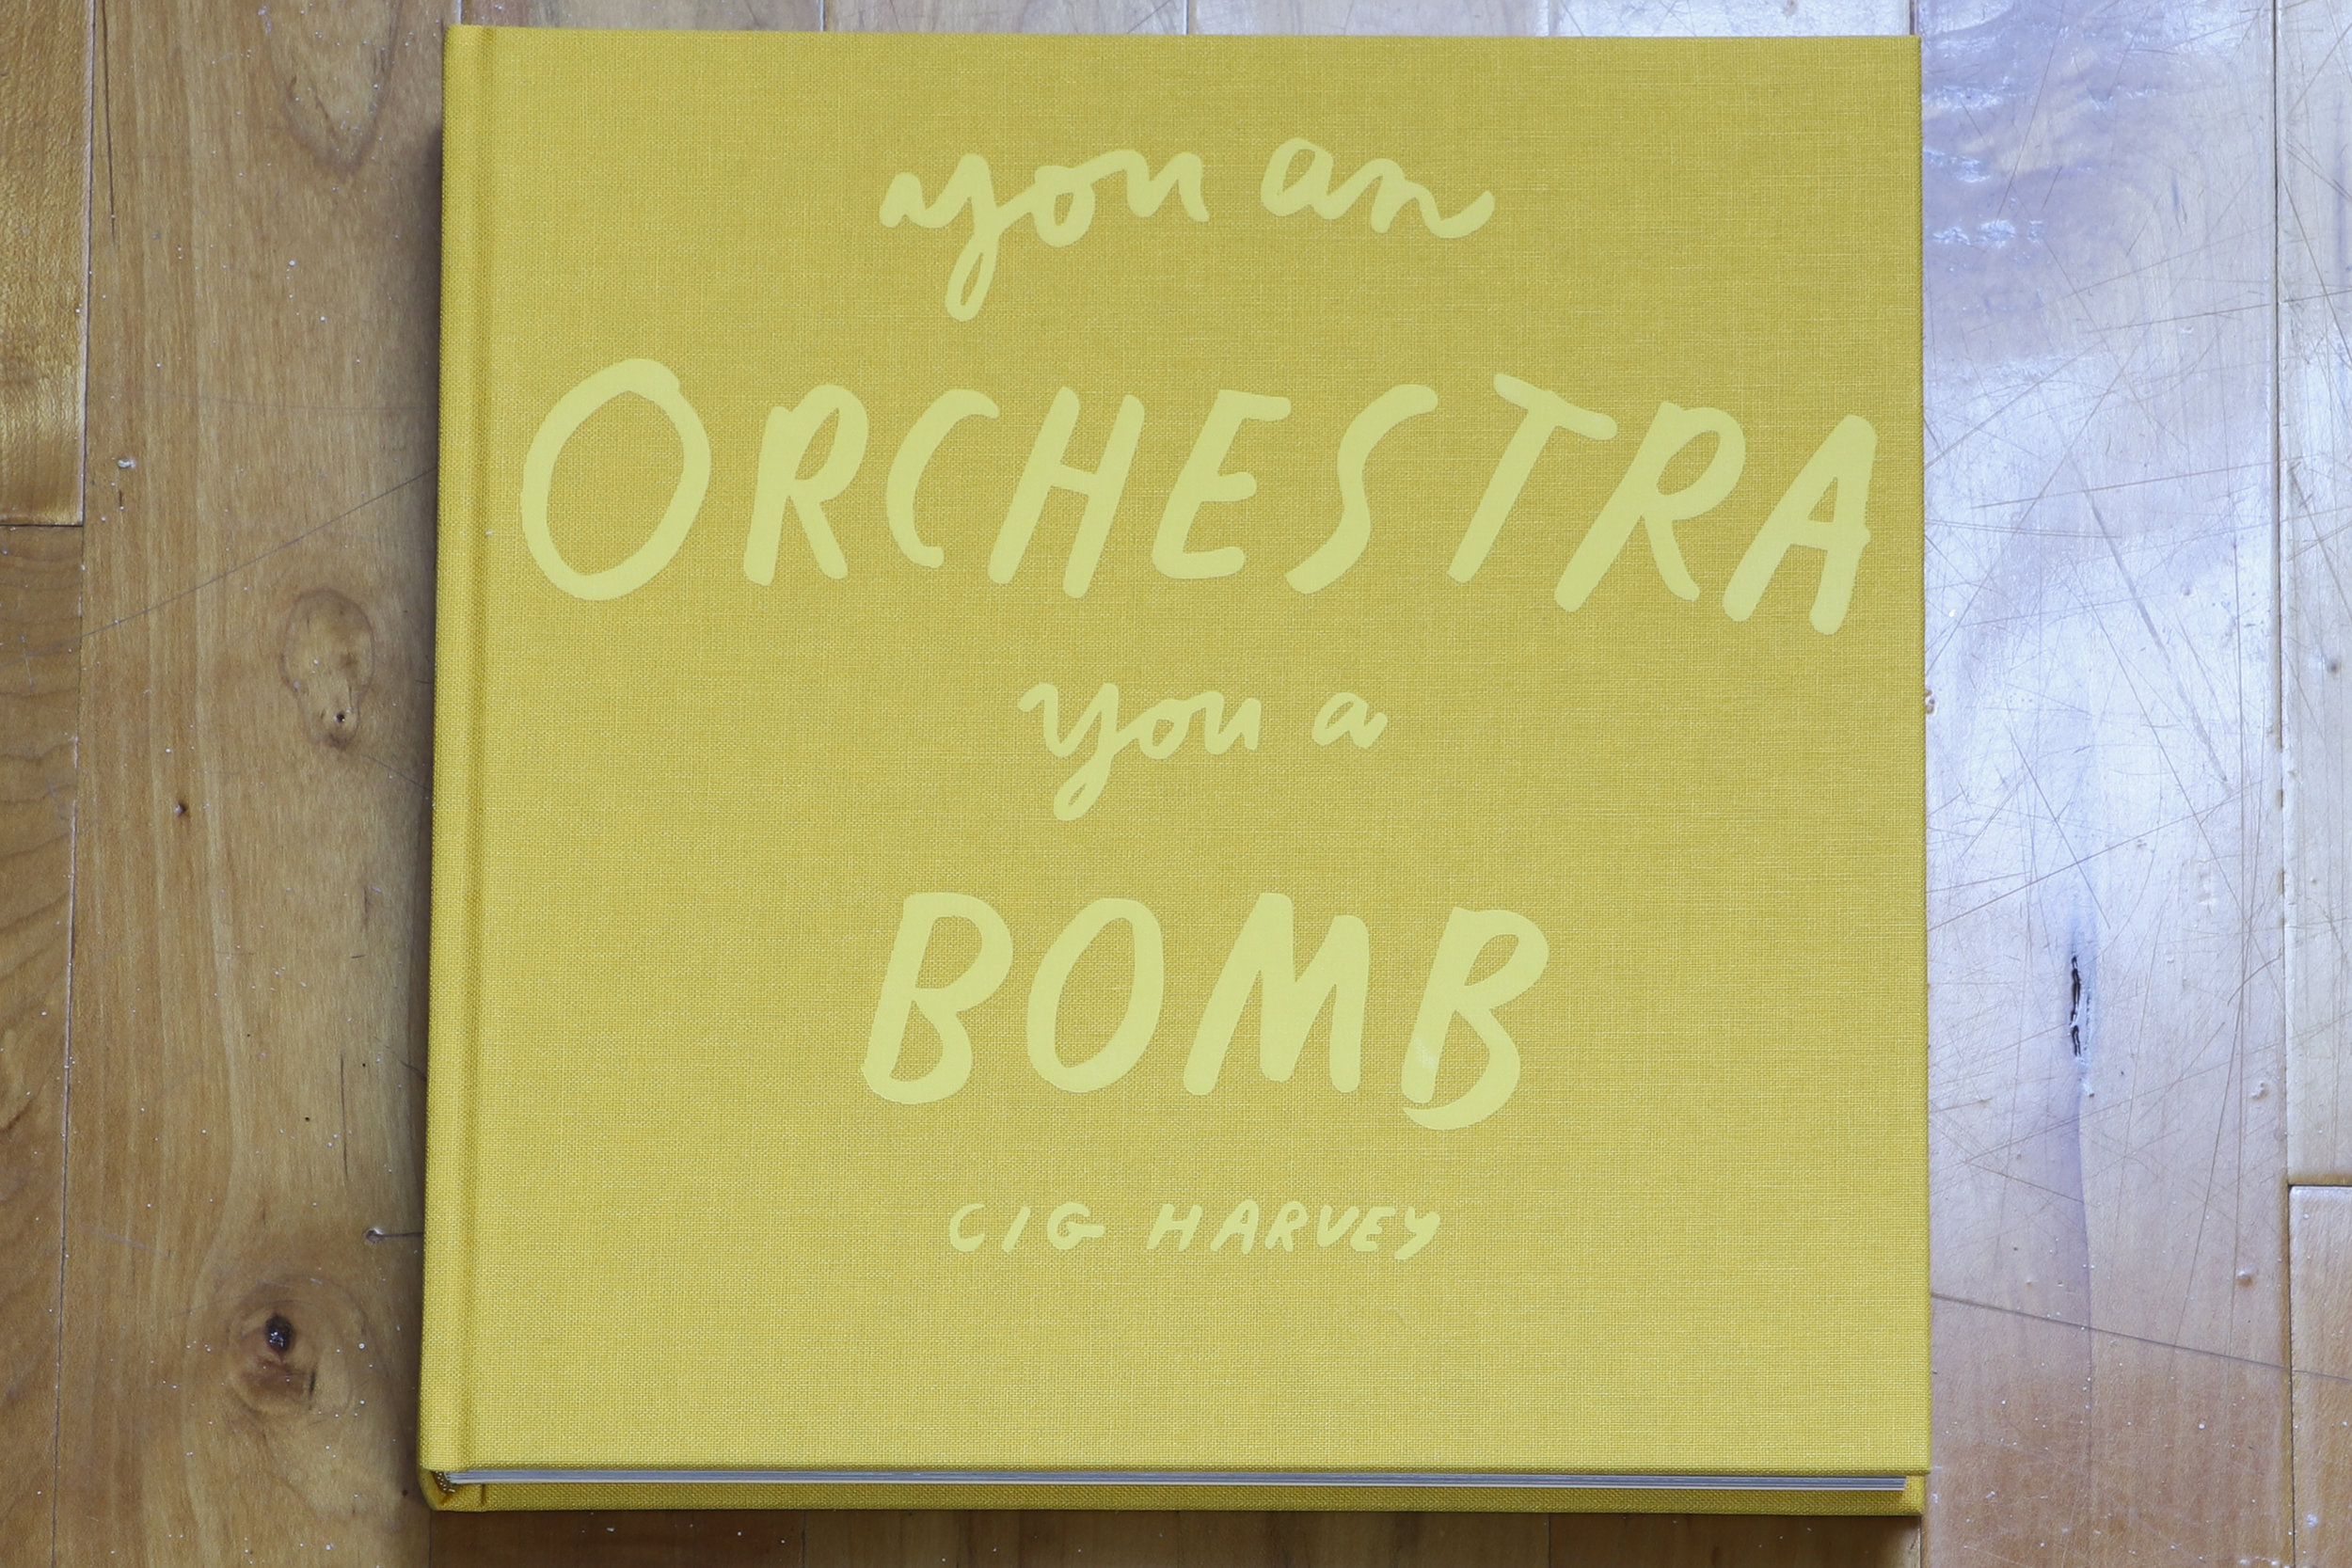 you an orch front cover.jpg